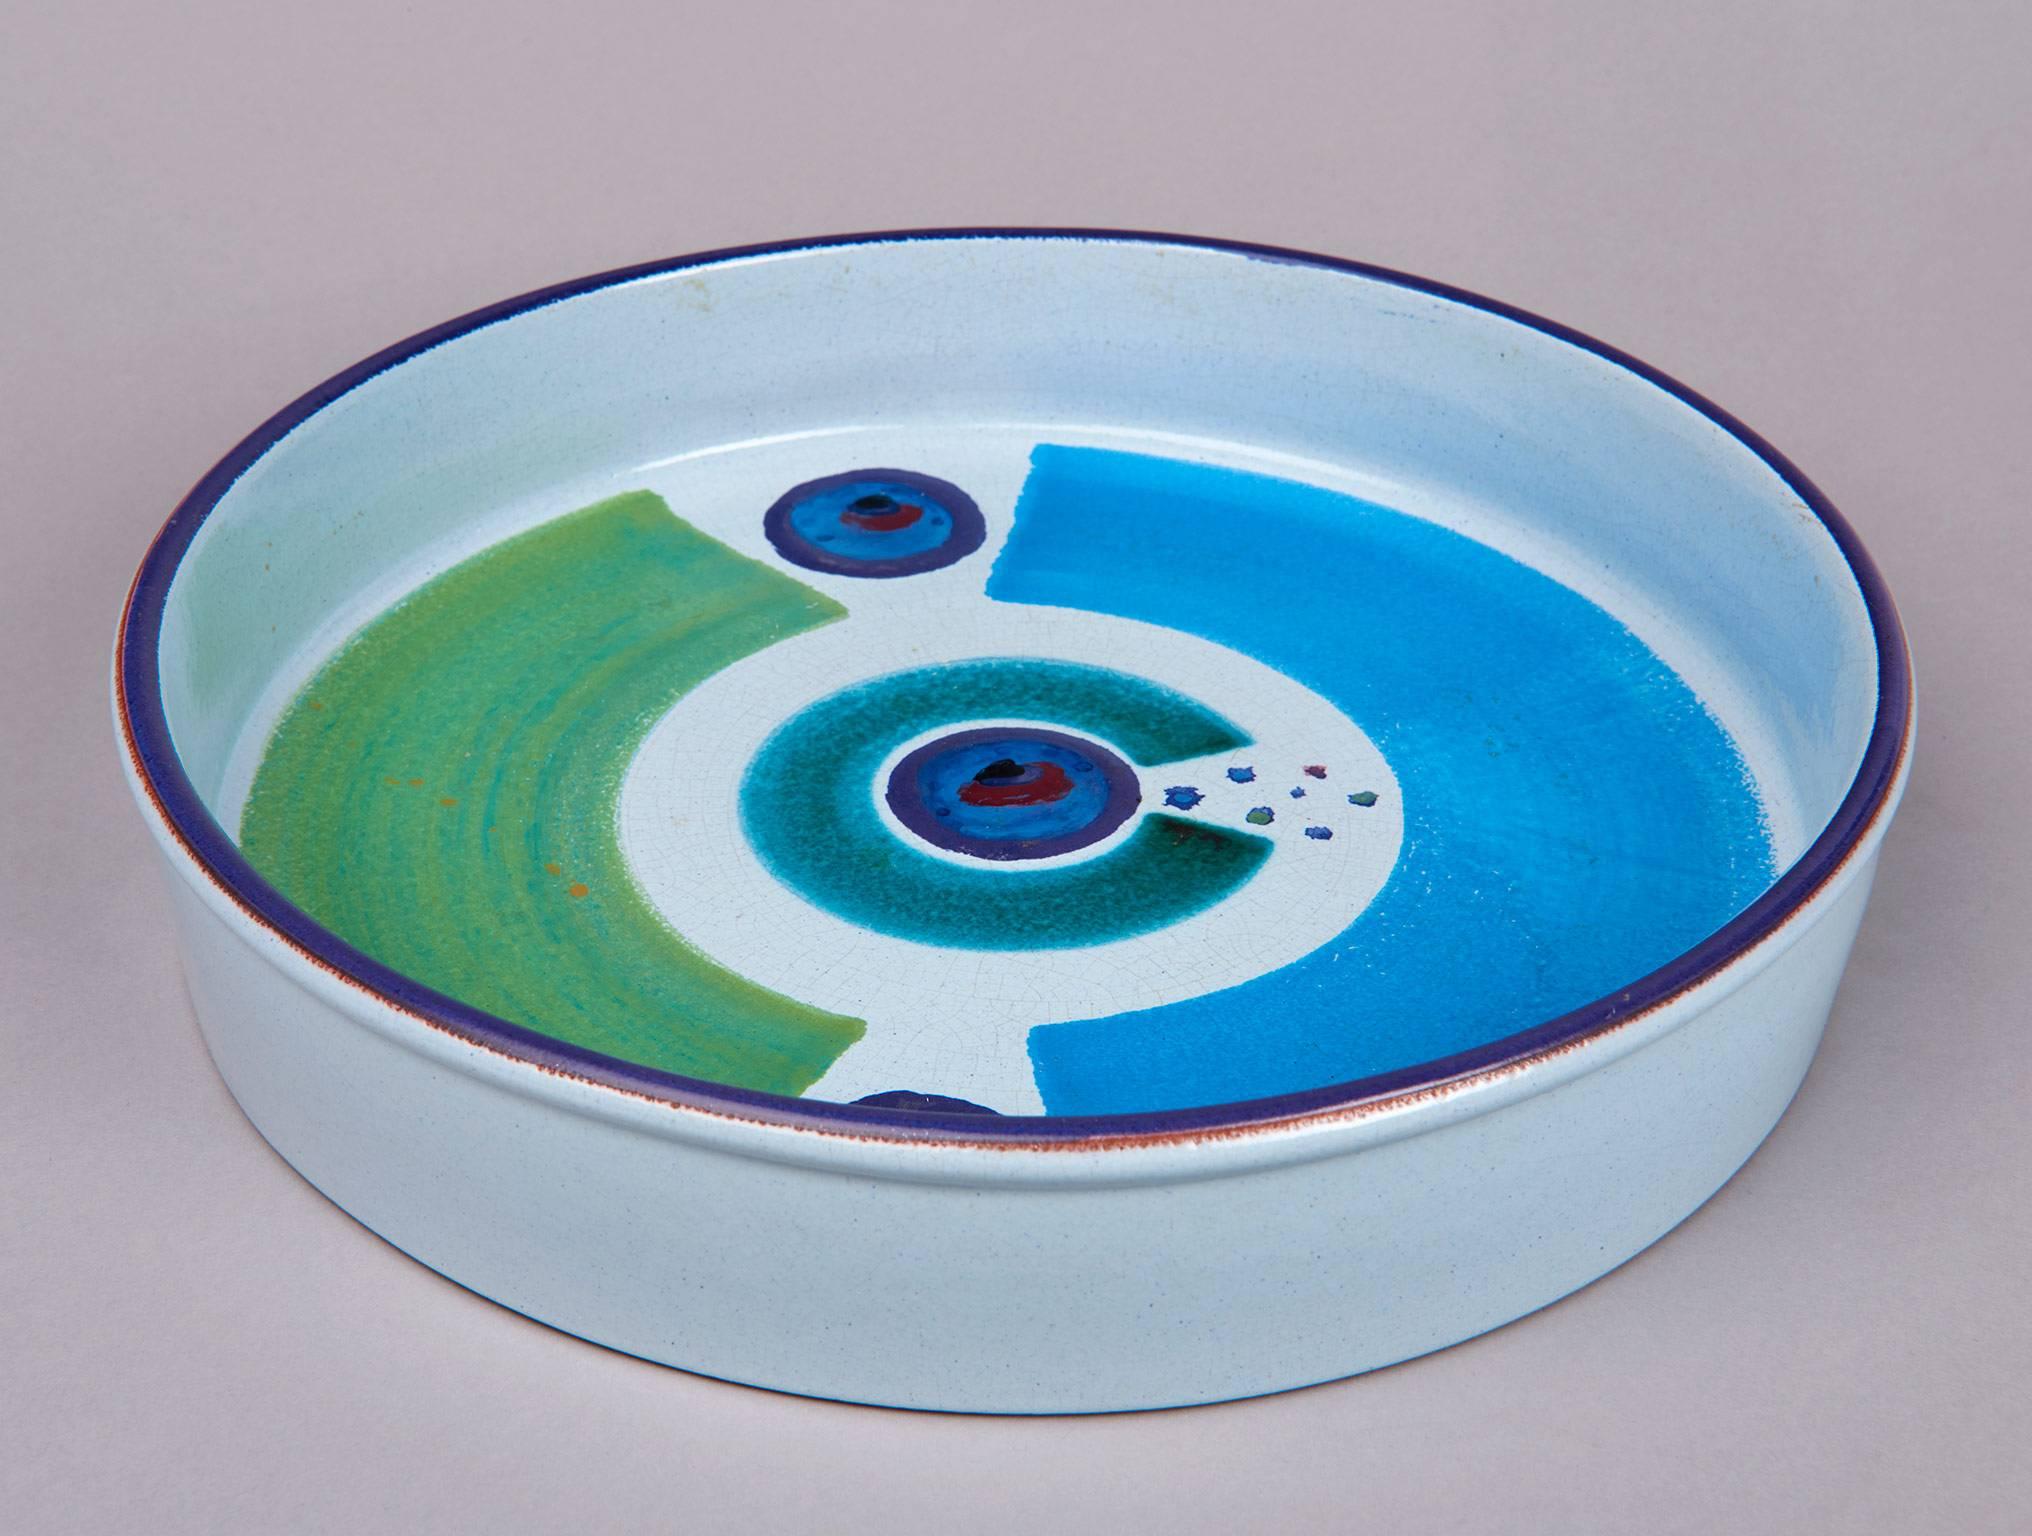 A lovely bowl, glazed with a hand-painted abstract design that suggests Stig Lindberg was an enthusiast of Ettore Sottsass's early ceramics. Signed with the Gustavsberg Studio mark, and the personal mark of the painter, Karin Björquist (Björquist is